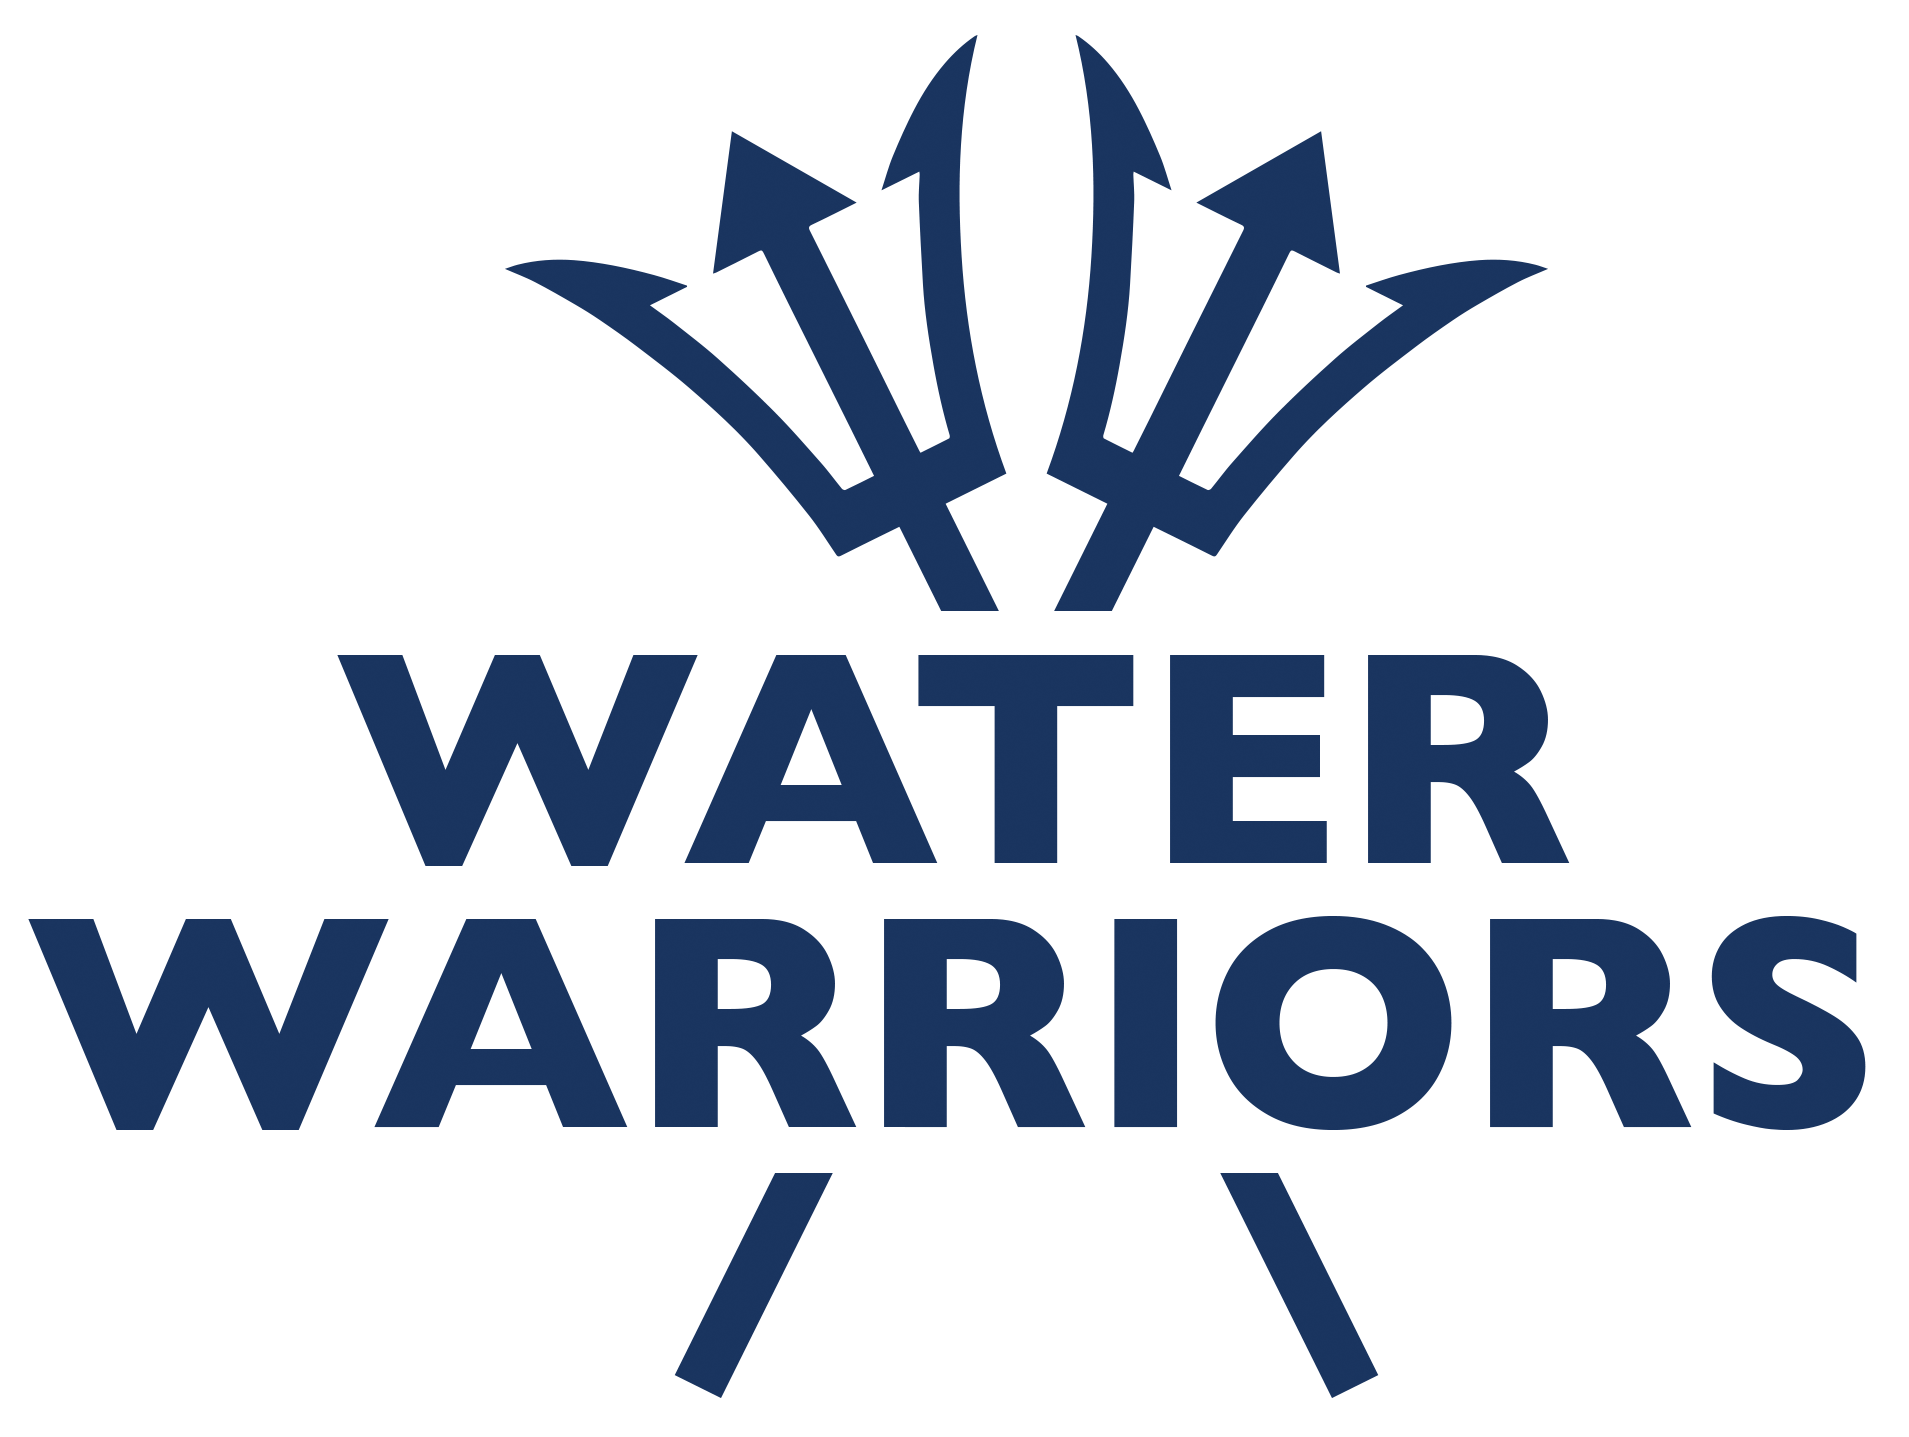 This is a photo of the Water Warriors logo.